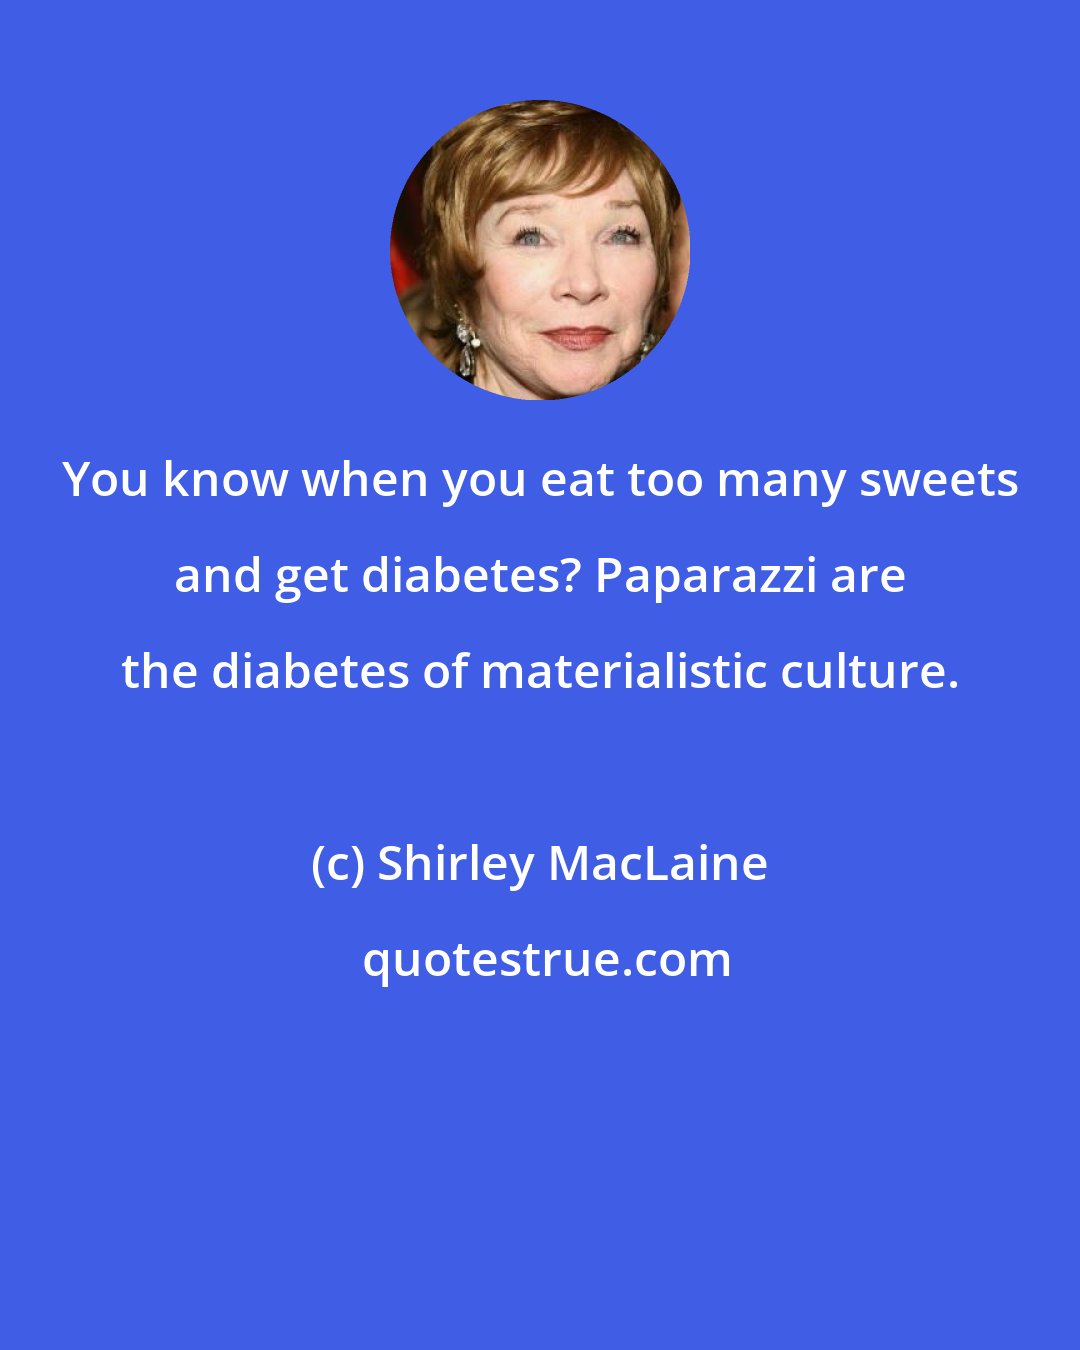 Shirley MacLaine: You know when you eat too many sweets and get diabetes? Paparazzi are the diabetes of materialistic culture.